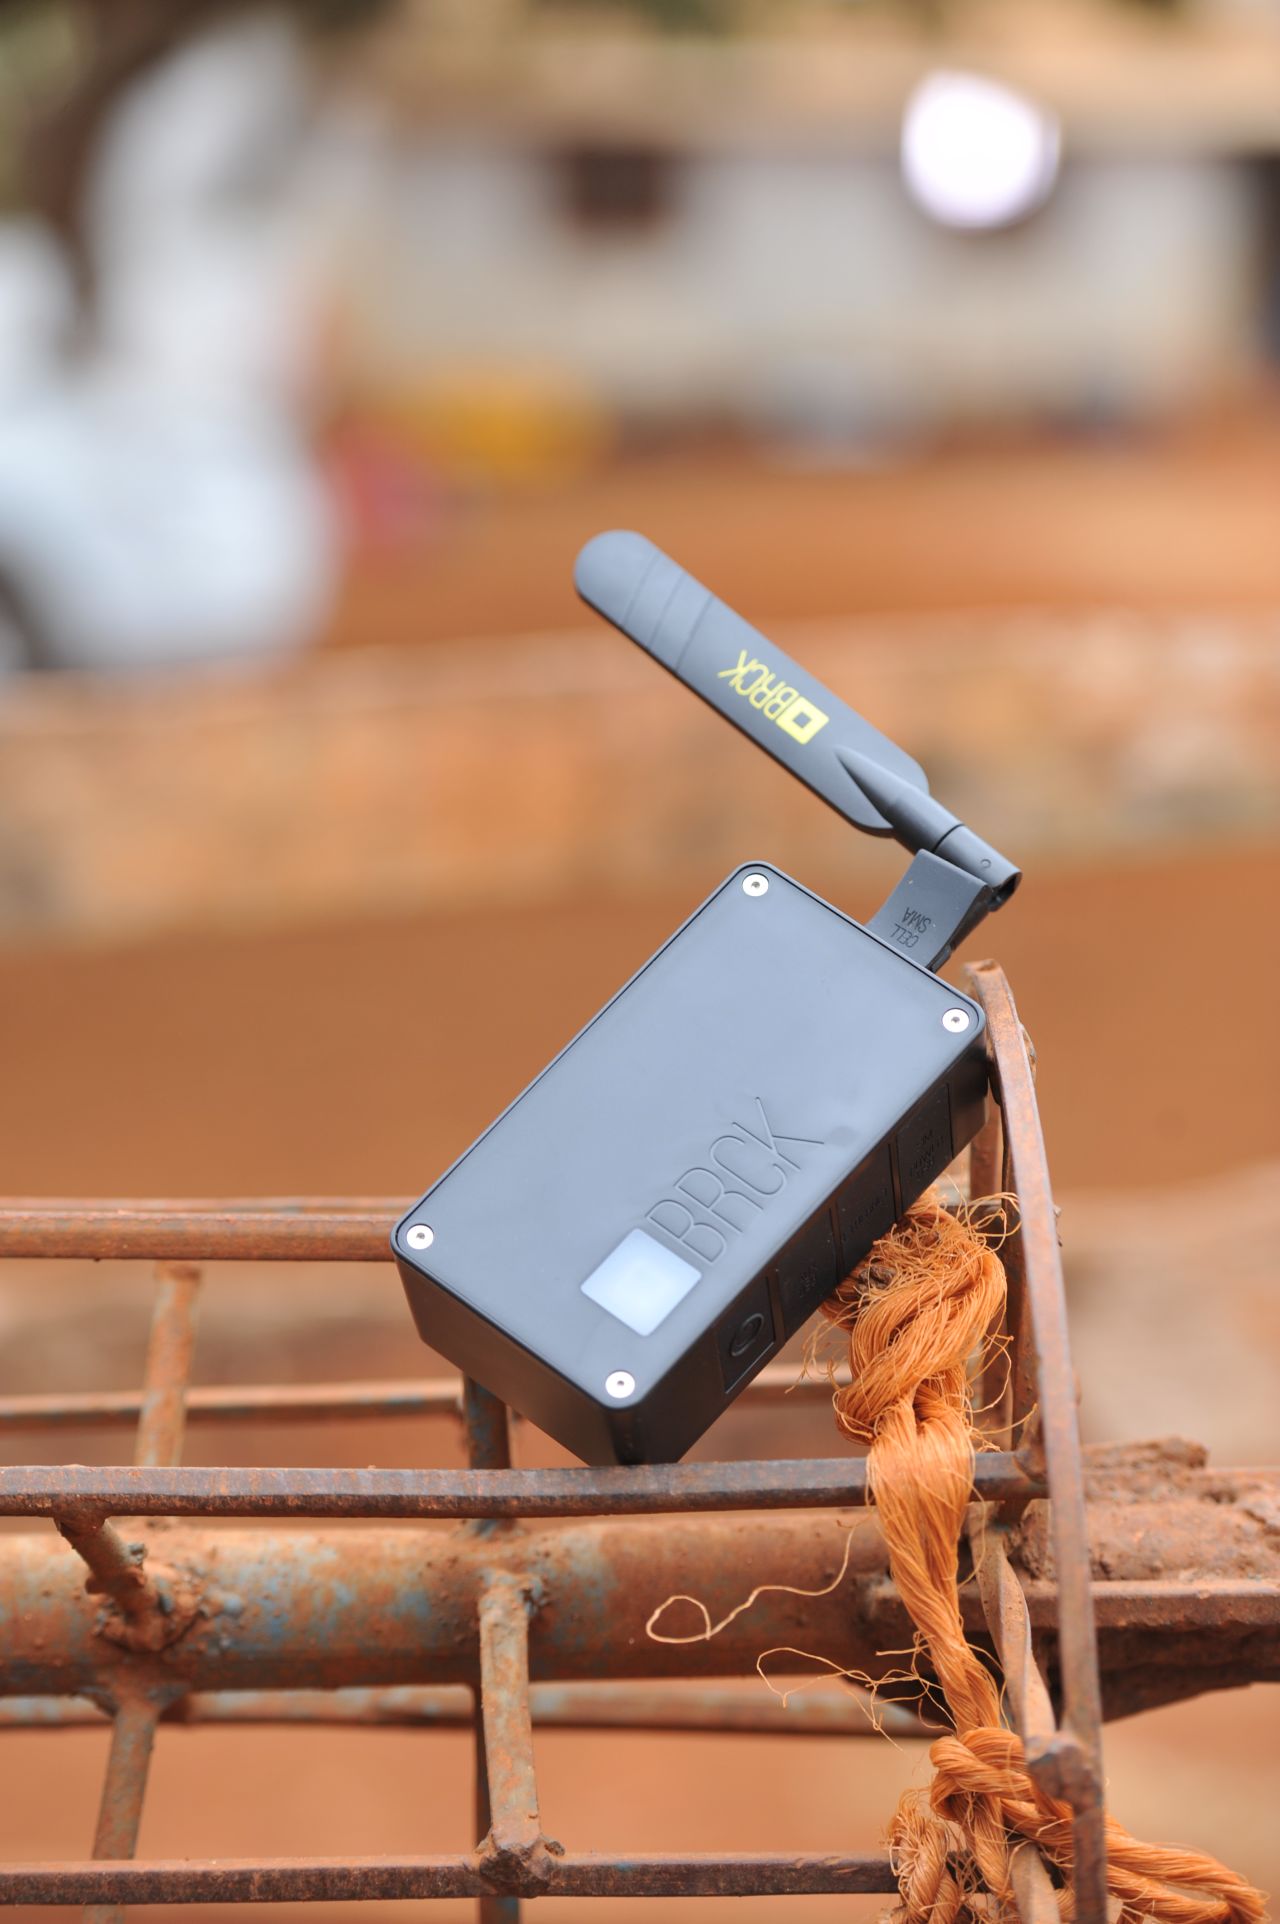 BRCK is a blackbox described by its Kenyan makers as "a backup generator for the internet," with the aim of solving Africa's connectivity issues. In Africa, there are power outages on a daily basis so getting online and staying online a requires a device that can seamlessly switch between multiple networks.<br />